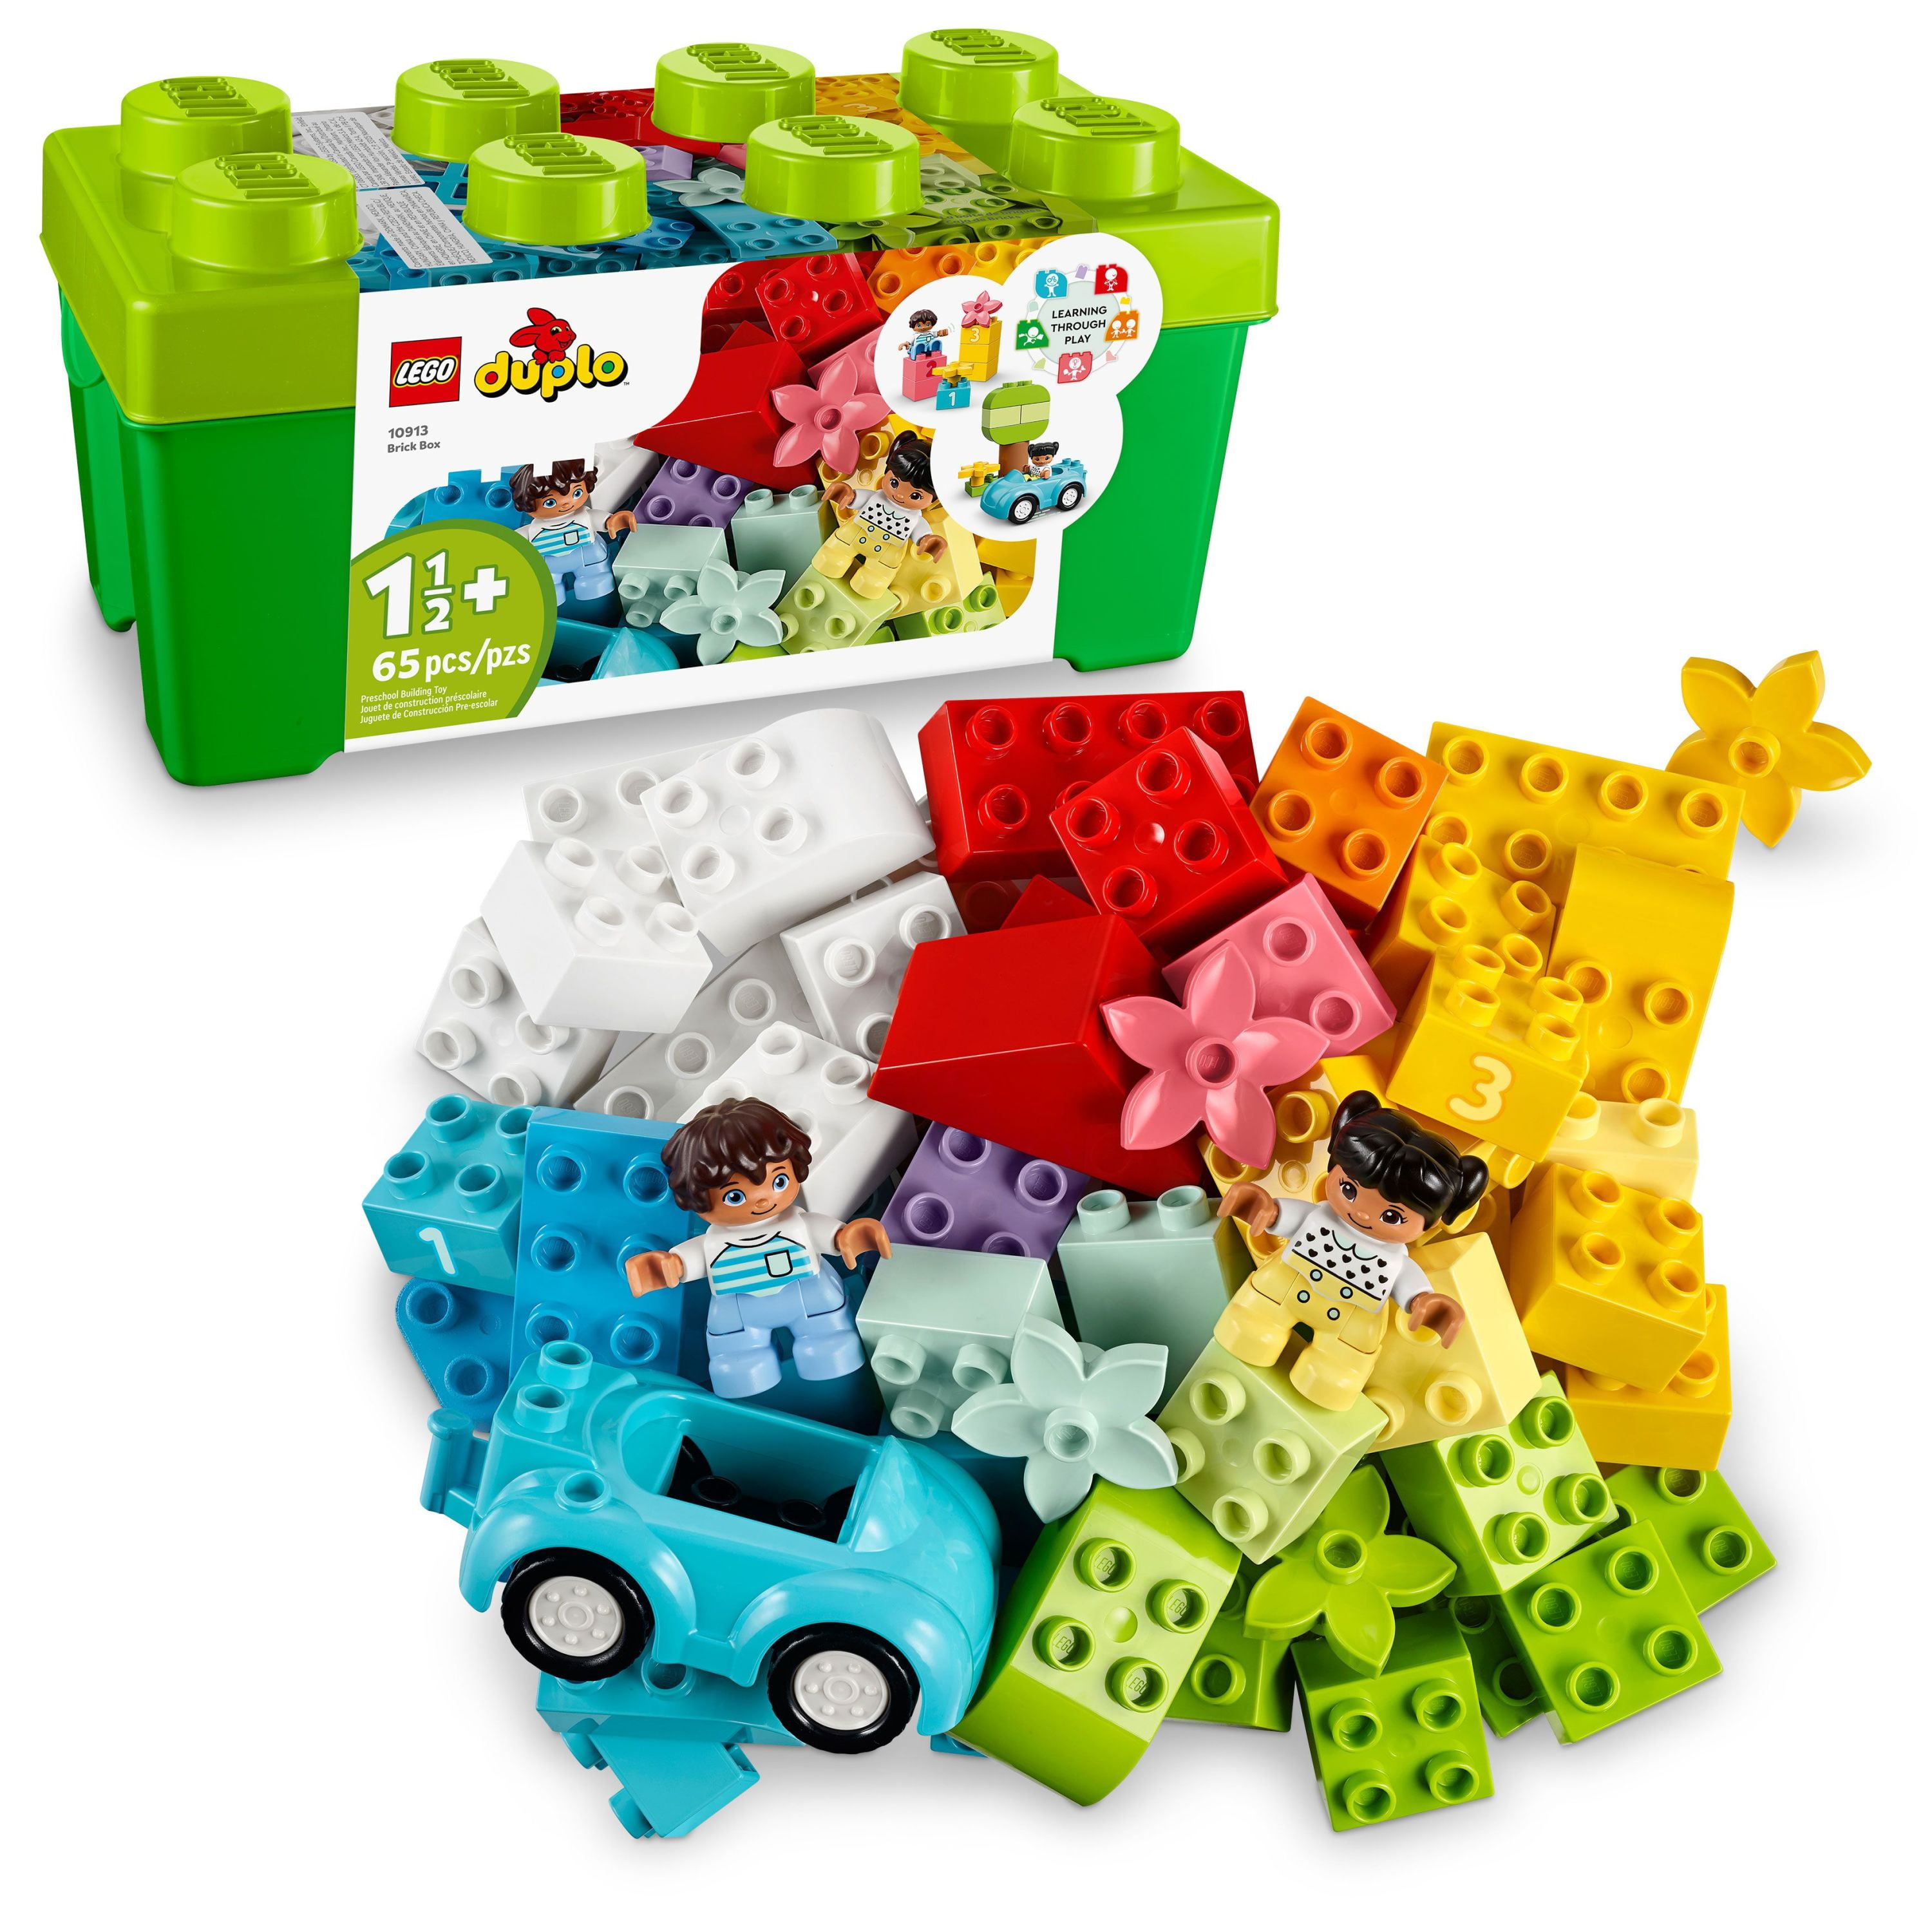 LEGO DUPLO Classic Brick Box Set with 10913, Toy Car, Number Bricks and More, Learning Toys for Toddlers, Boys & Girls 18 Months Old - Walmart.com